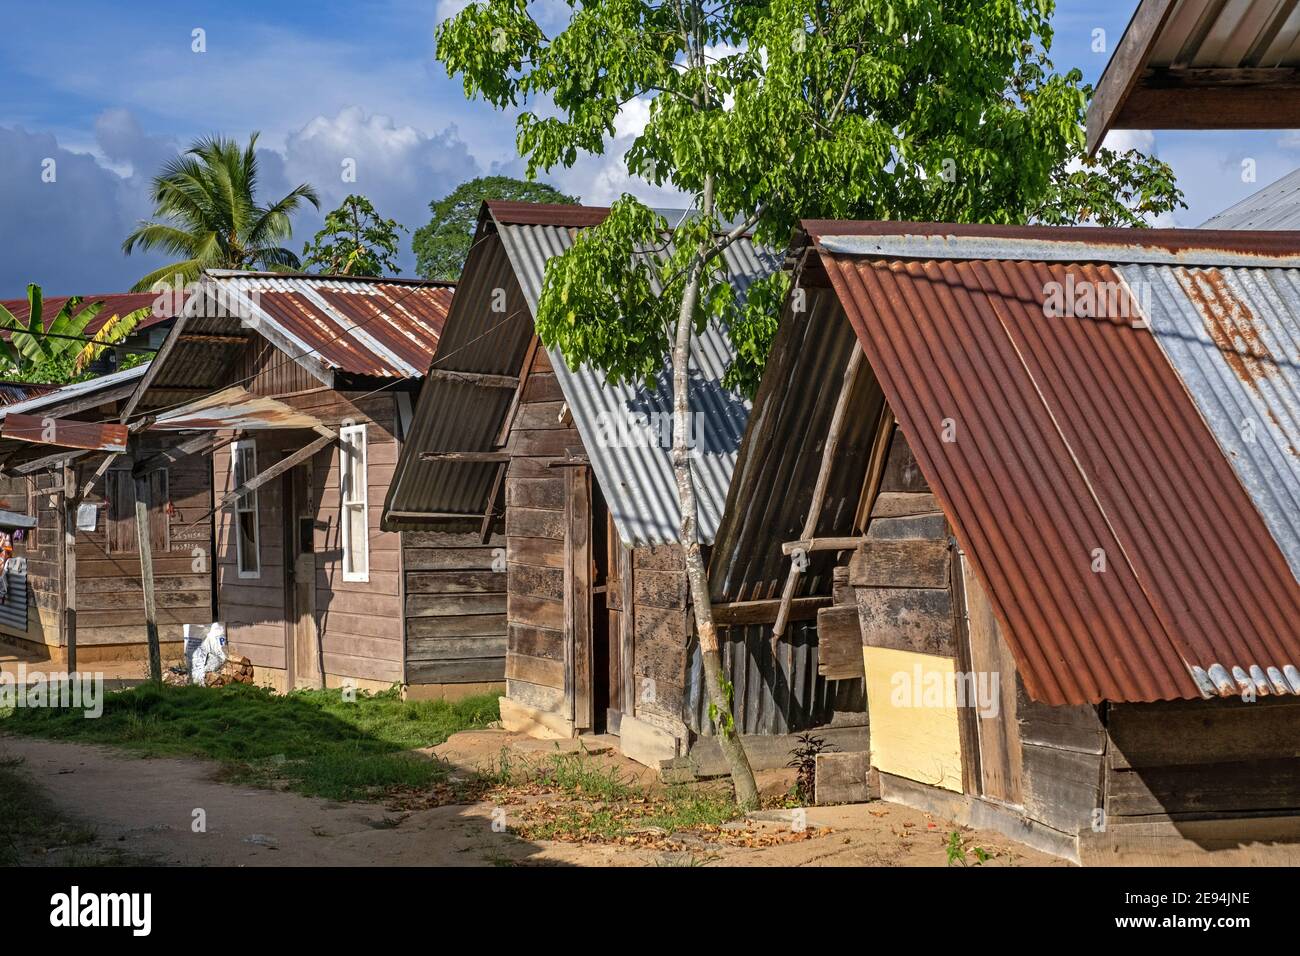 Wooden houses / huts with roofs made of corrugated sheets in the village Aurora, Sipaliwini District, Suriname / Surinam Stock Photo